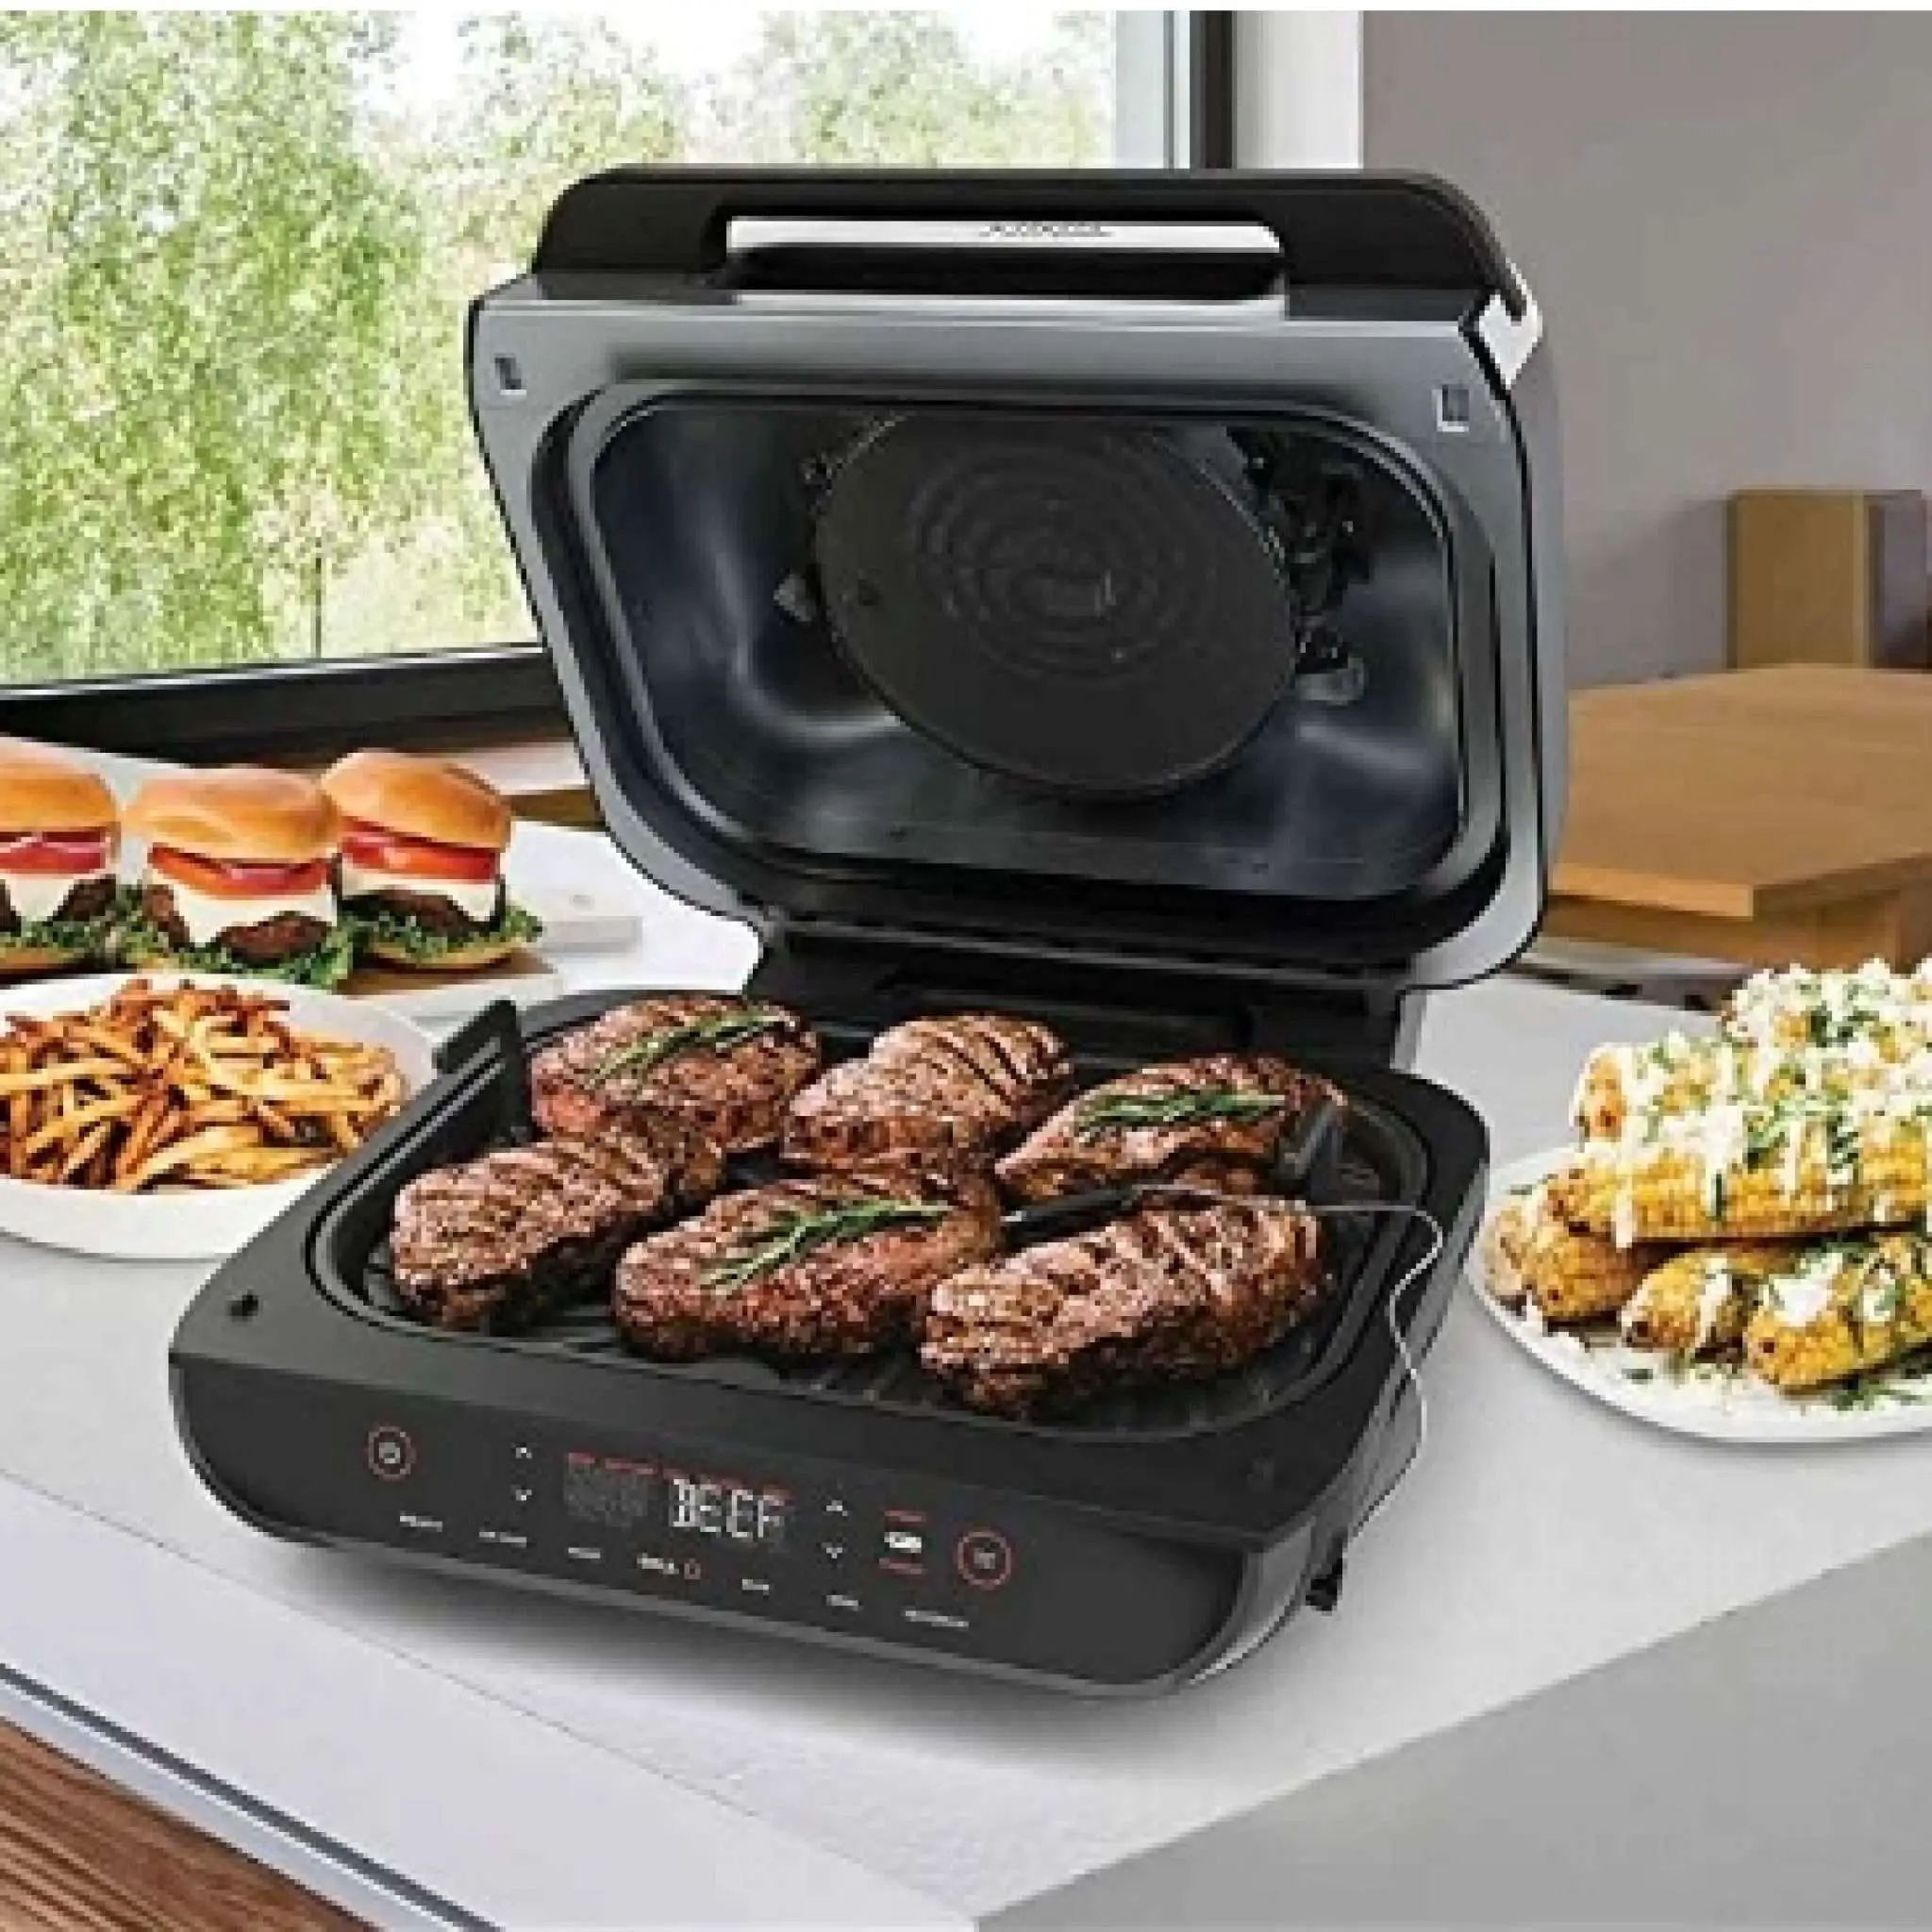 Ninja Foodi Grill Review  The Best Indoor Electric Grill for 2021